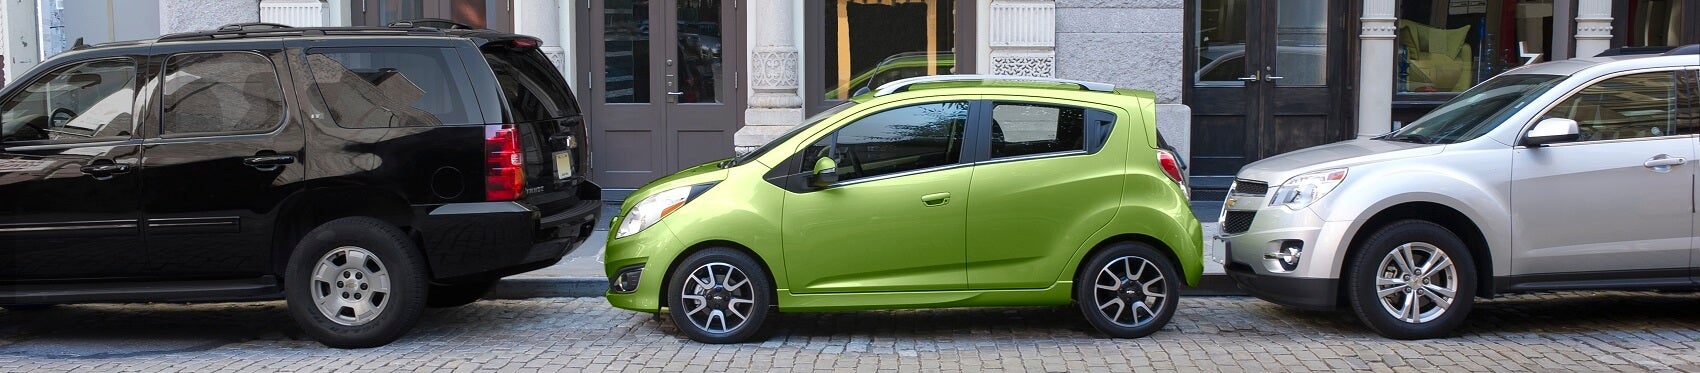 2021 Chevy Spark Review